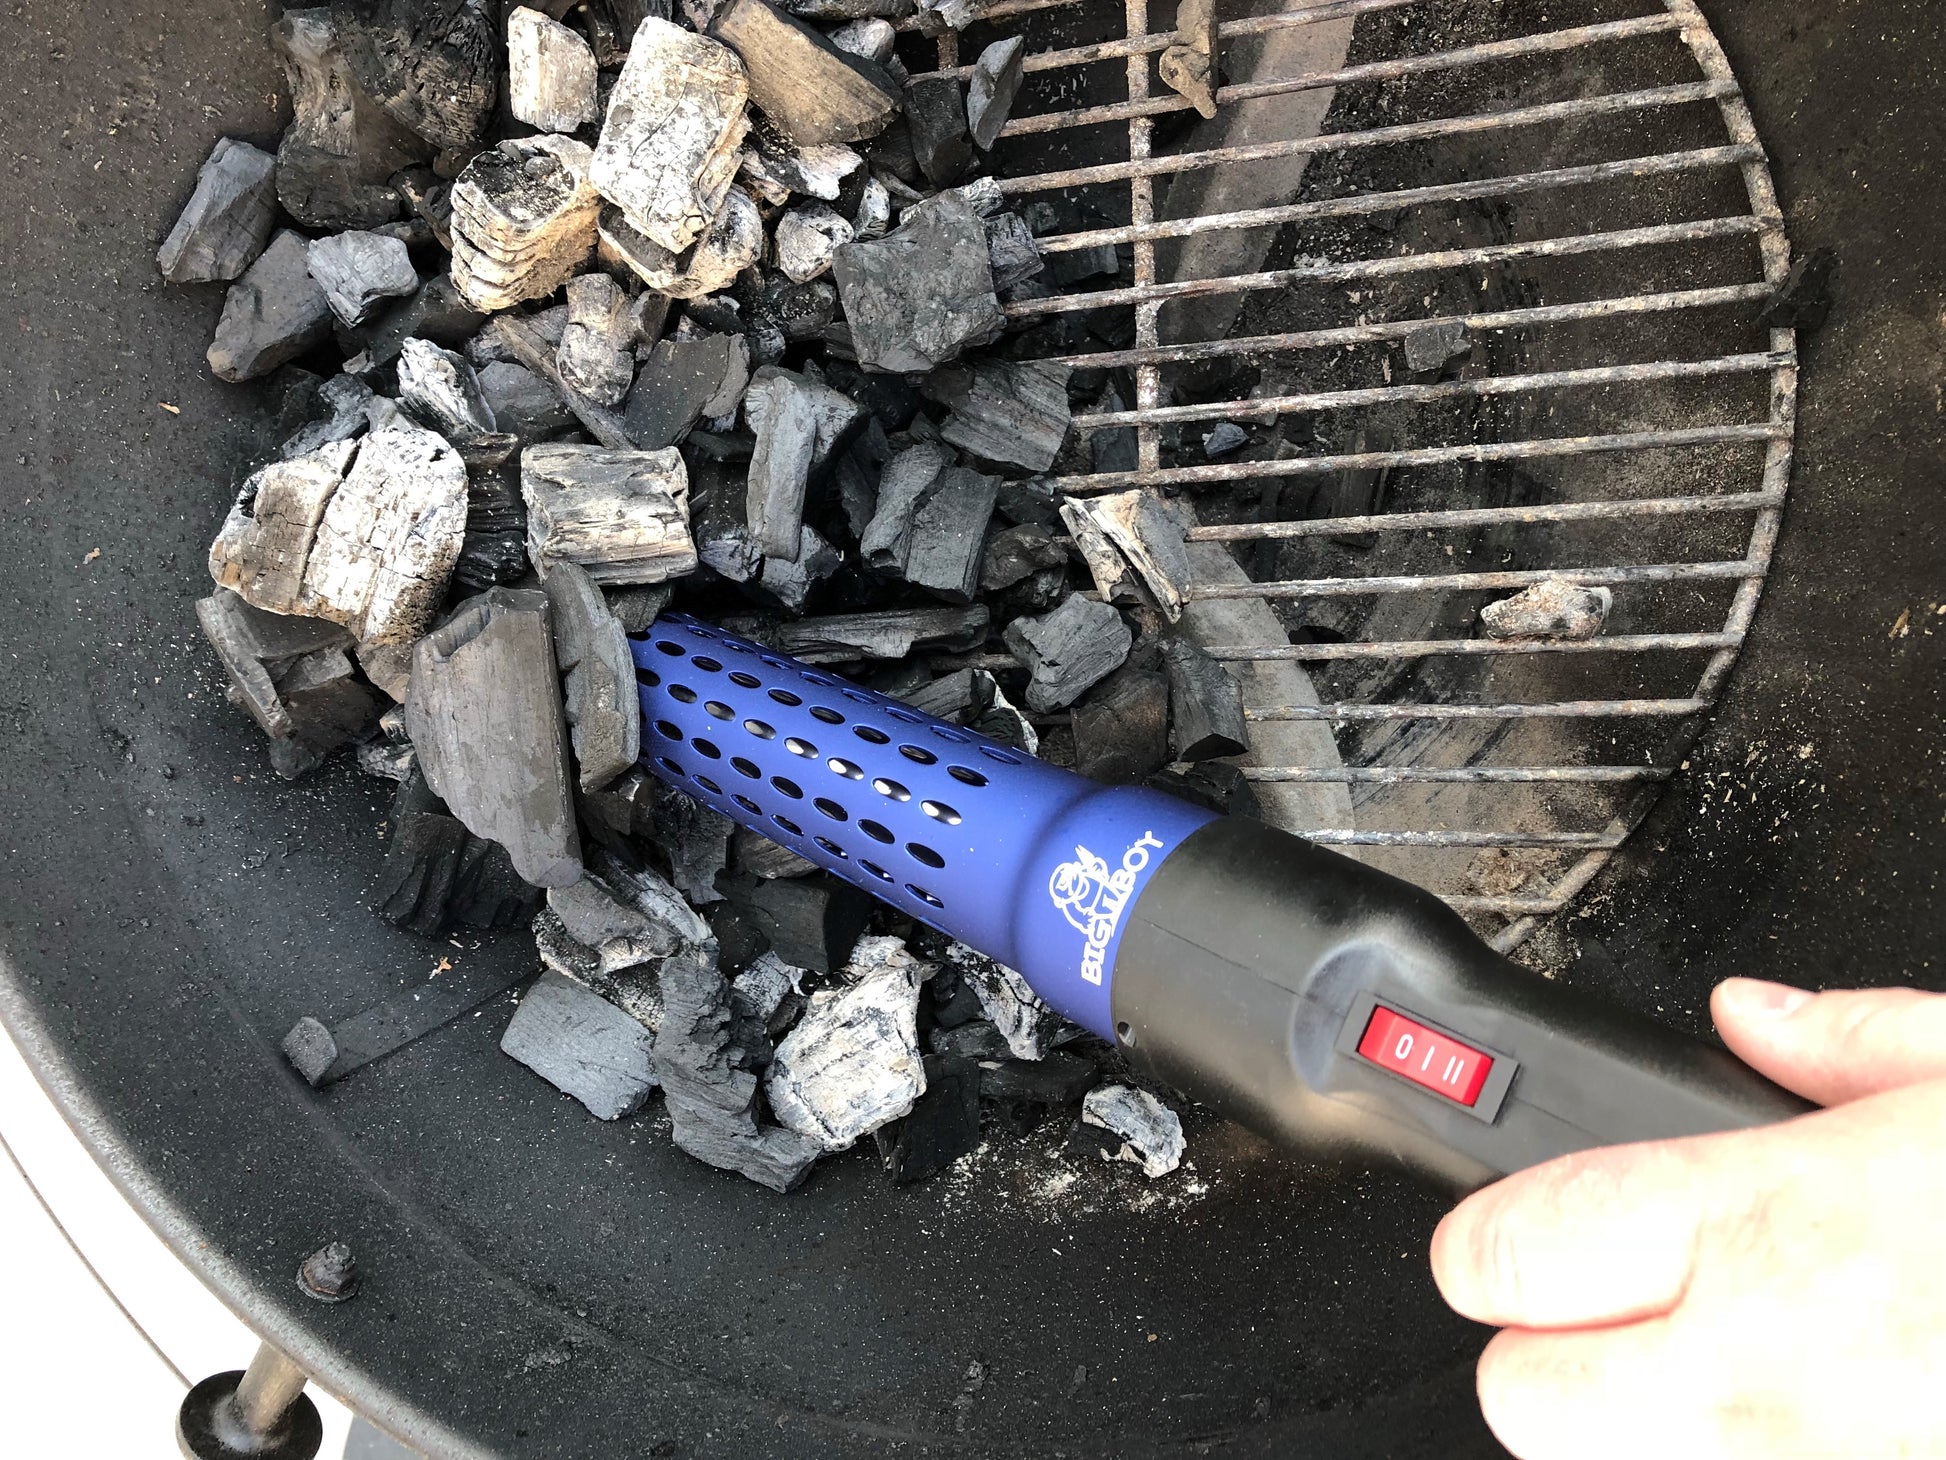 Big Boy Looftlighter for Charcoal and Briquette BBQing and Grilling for Sale at Barbecues Galore